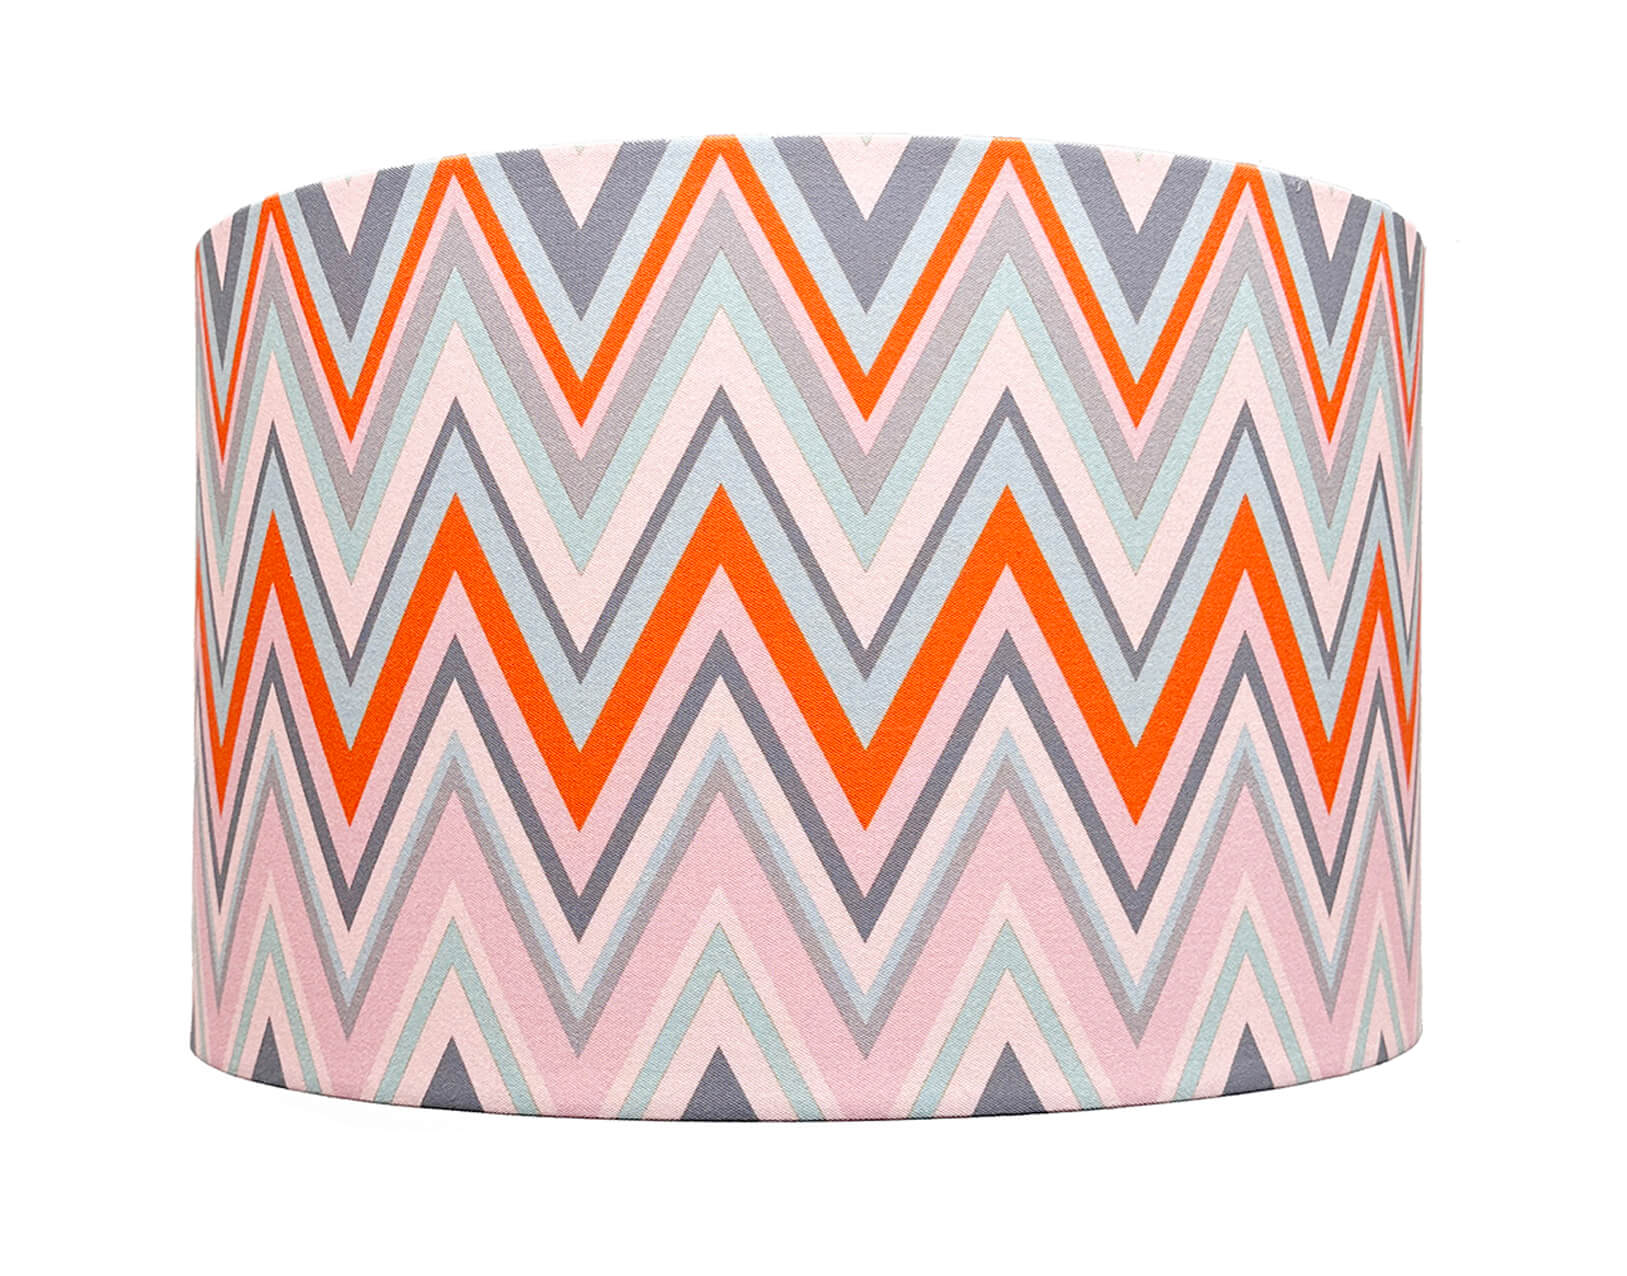 Zig Zag in Clementine lampshade